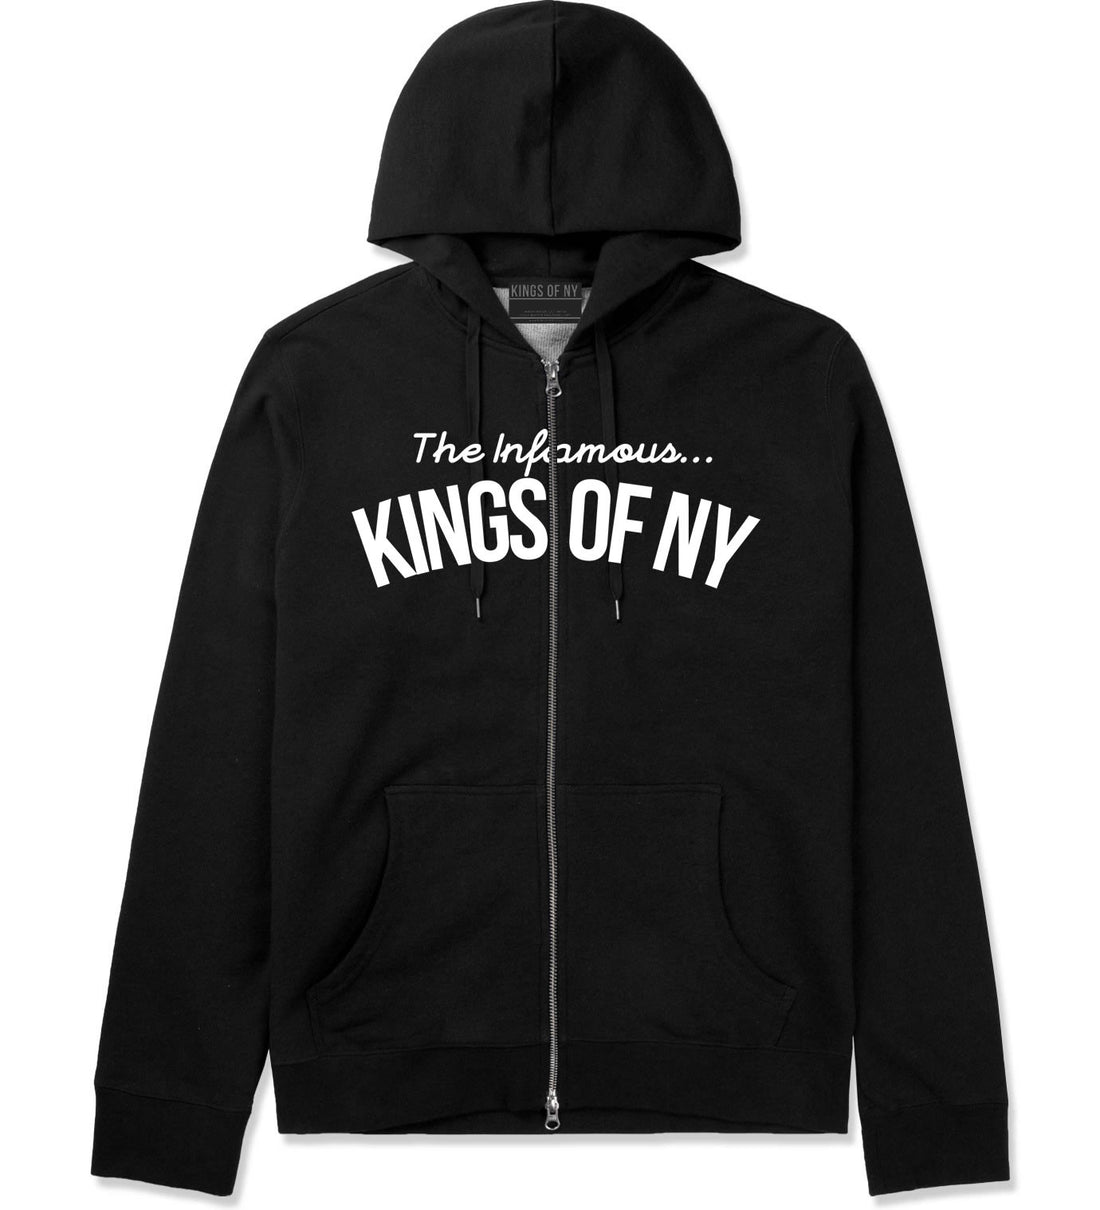 The Infamous Kings Of NY Zip Up Hoodie in Black By Kings Of NY